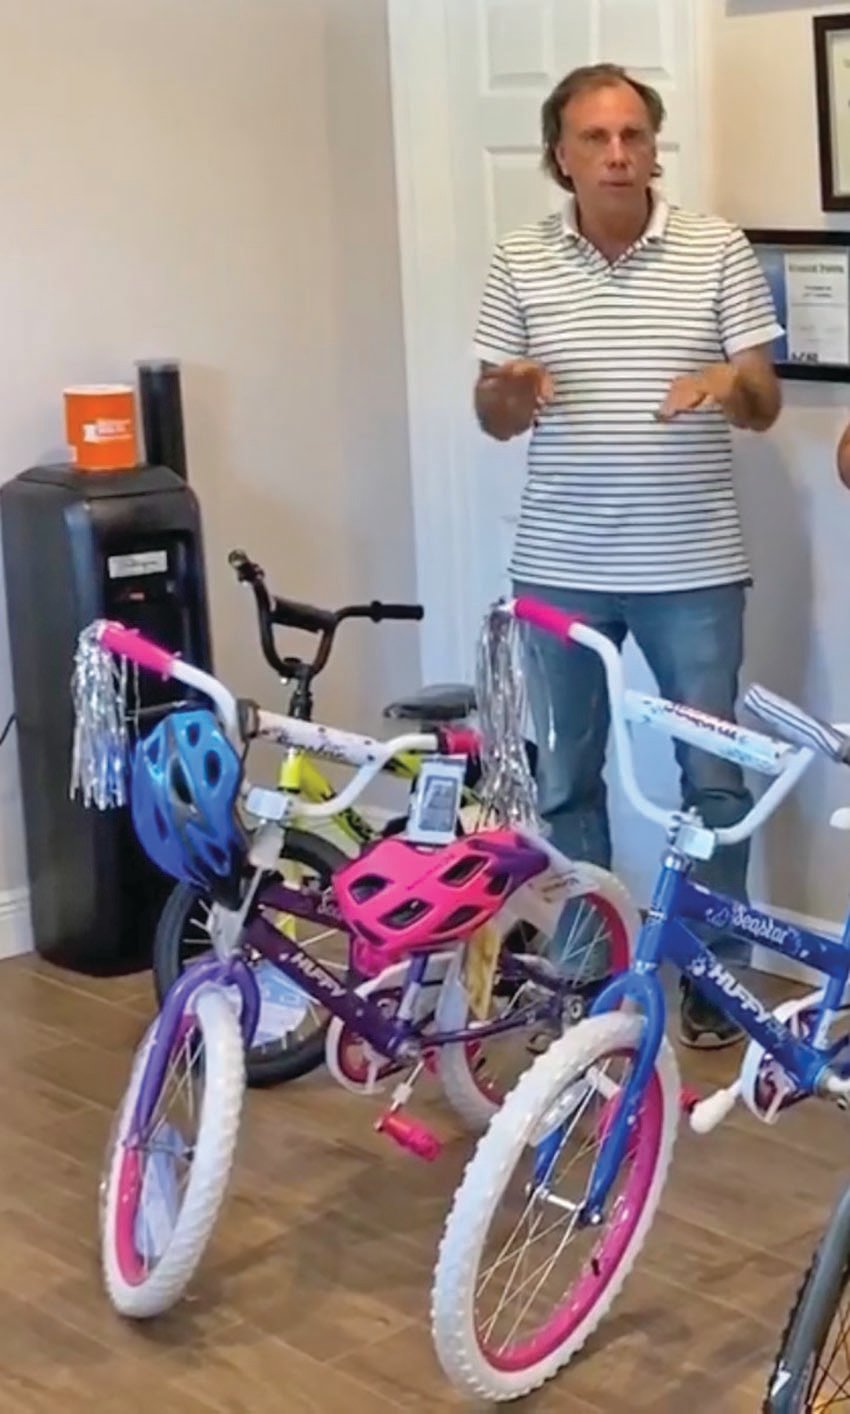 LABELLE — Jeff Campbell of Direct Repair Collision Center gives away two kids’ bikes for October as a way to show his appreciation for the community’s support.